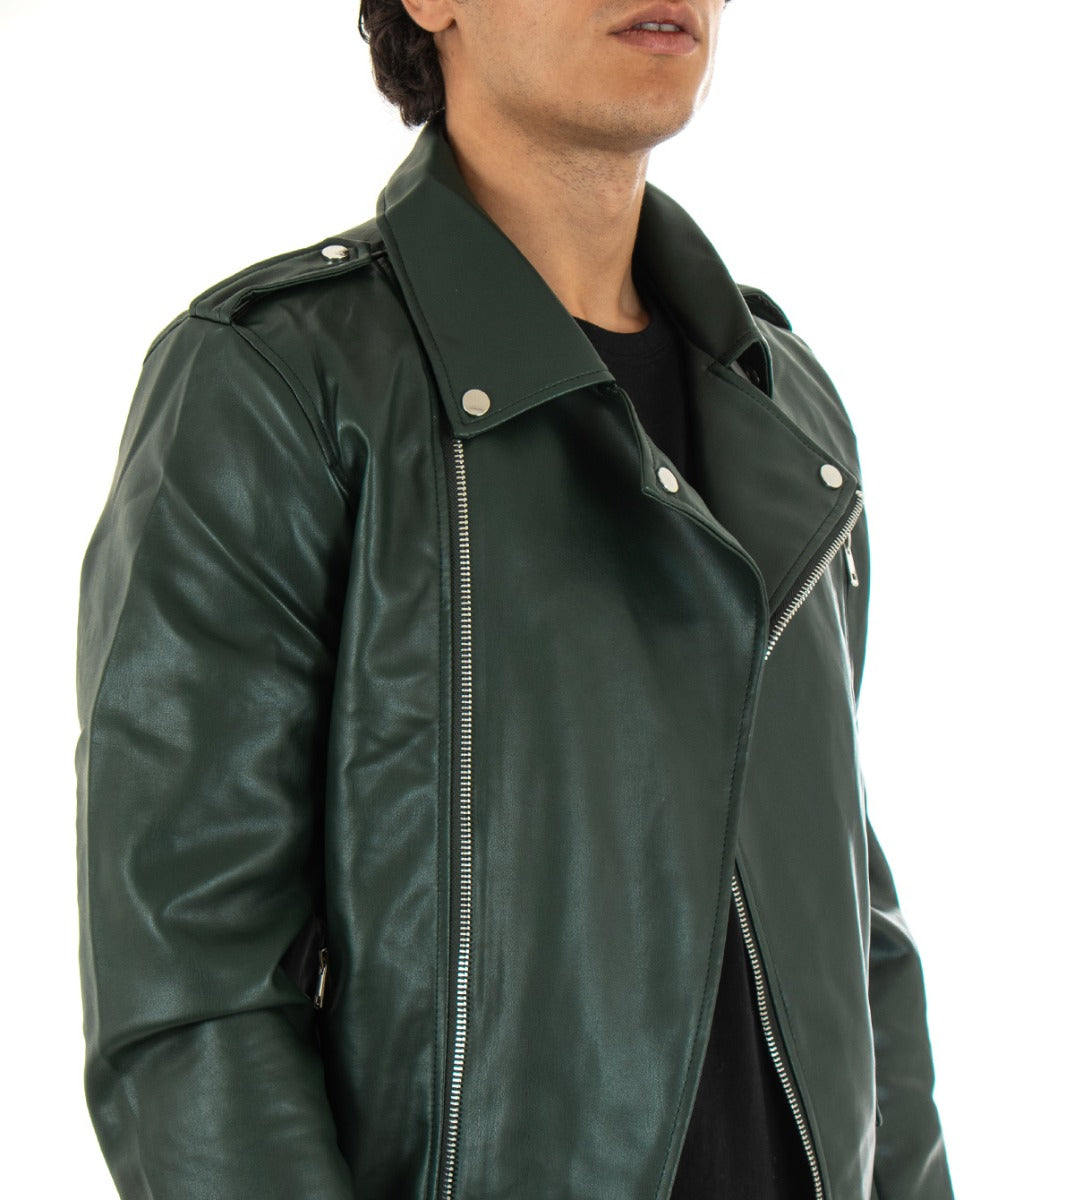 Men's Faux Leather Jacket Solid Color Green Casual Biker Long Sleeves GIOSAL